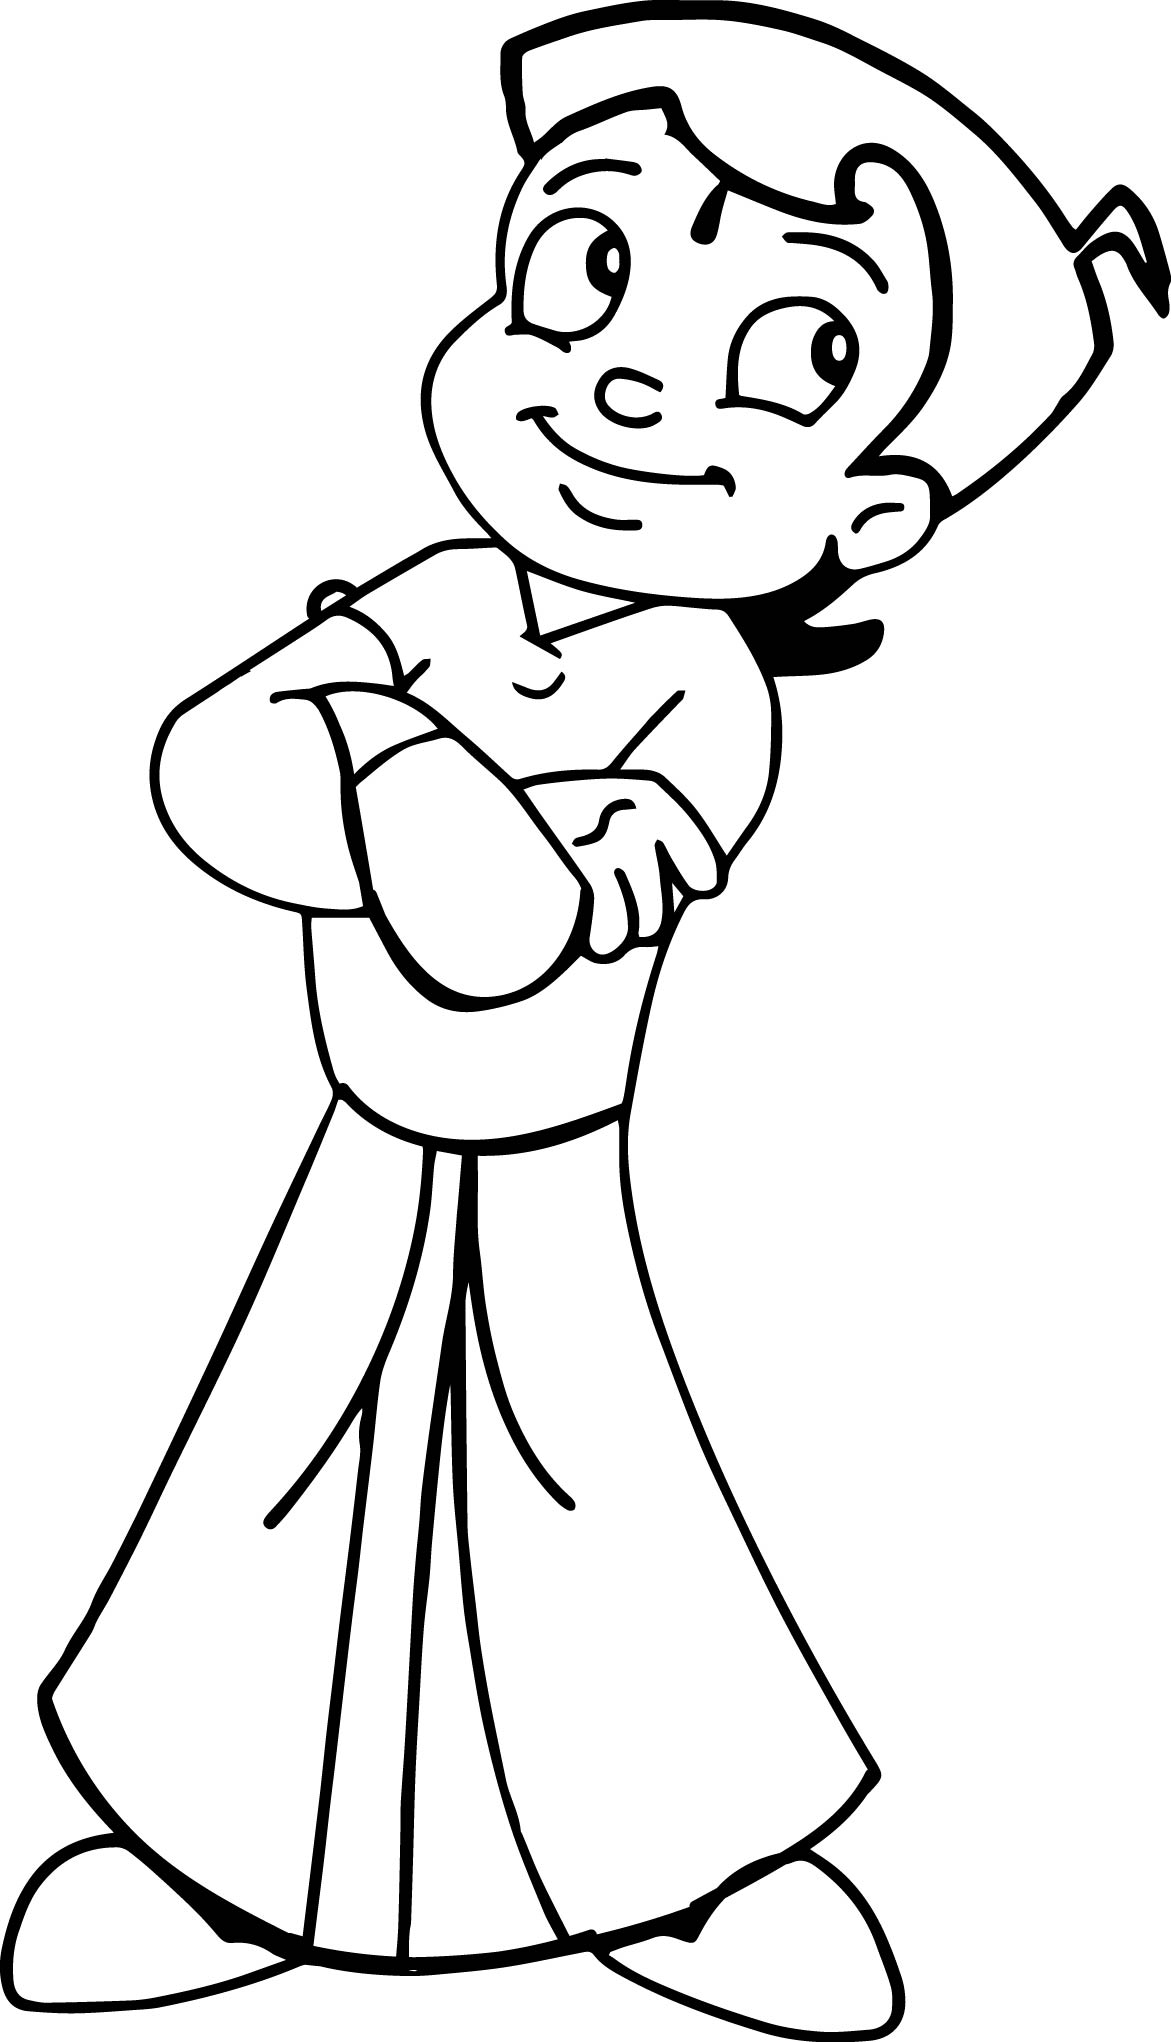 chotta bheem pictures chhota bheem and krishna coloring page free printable chotta pictures bheem 